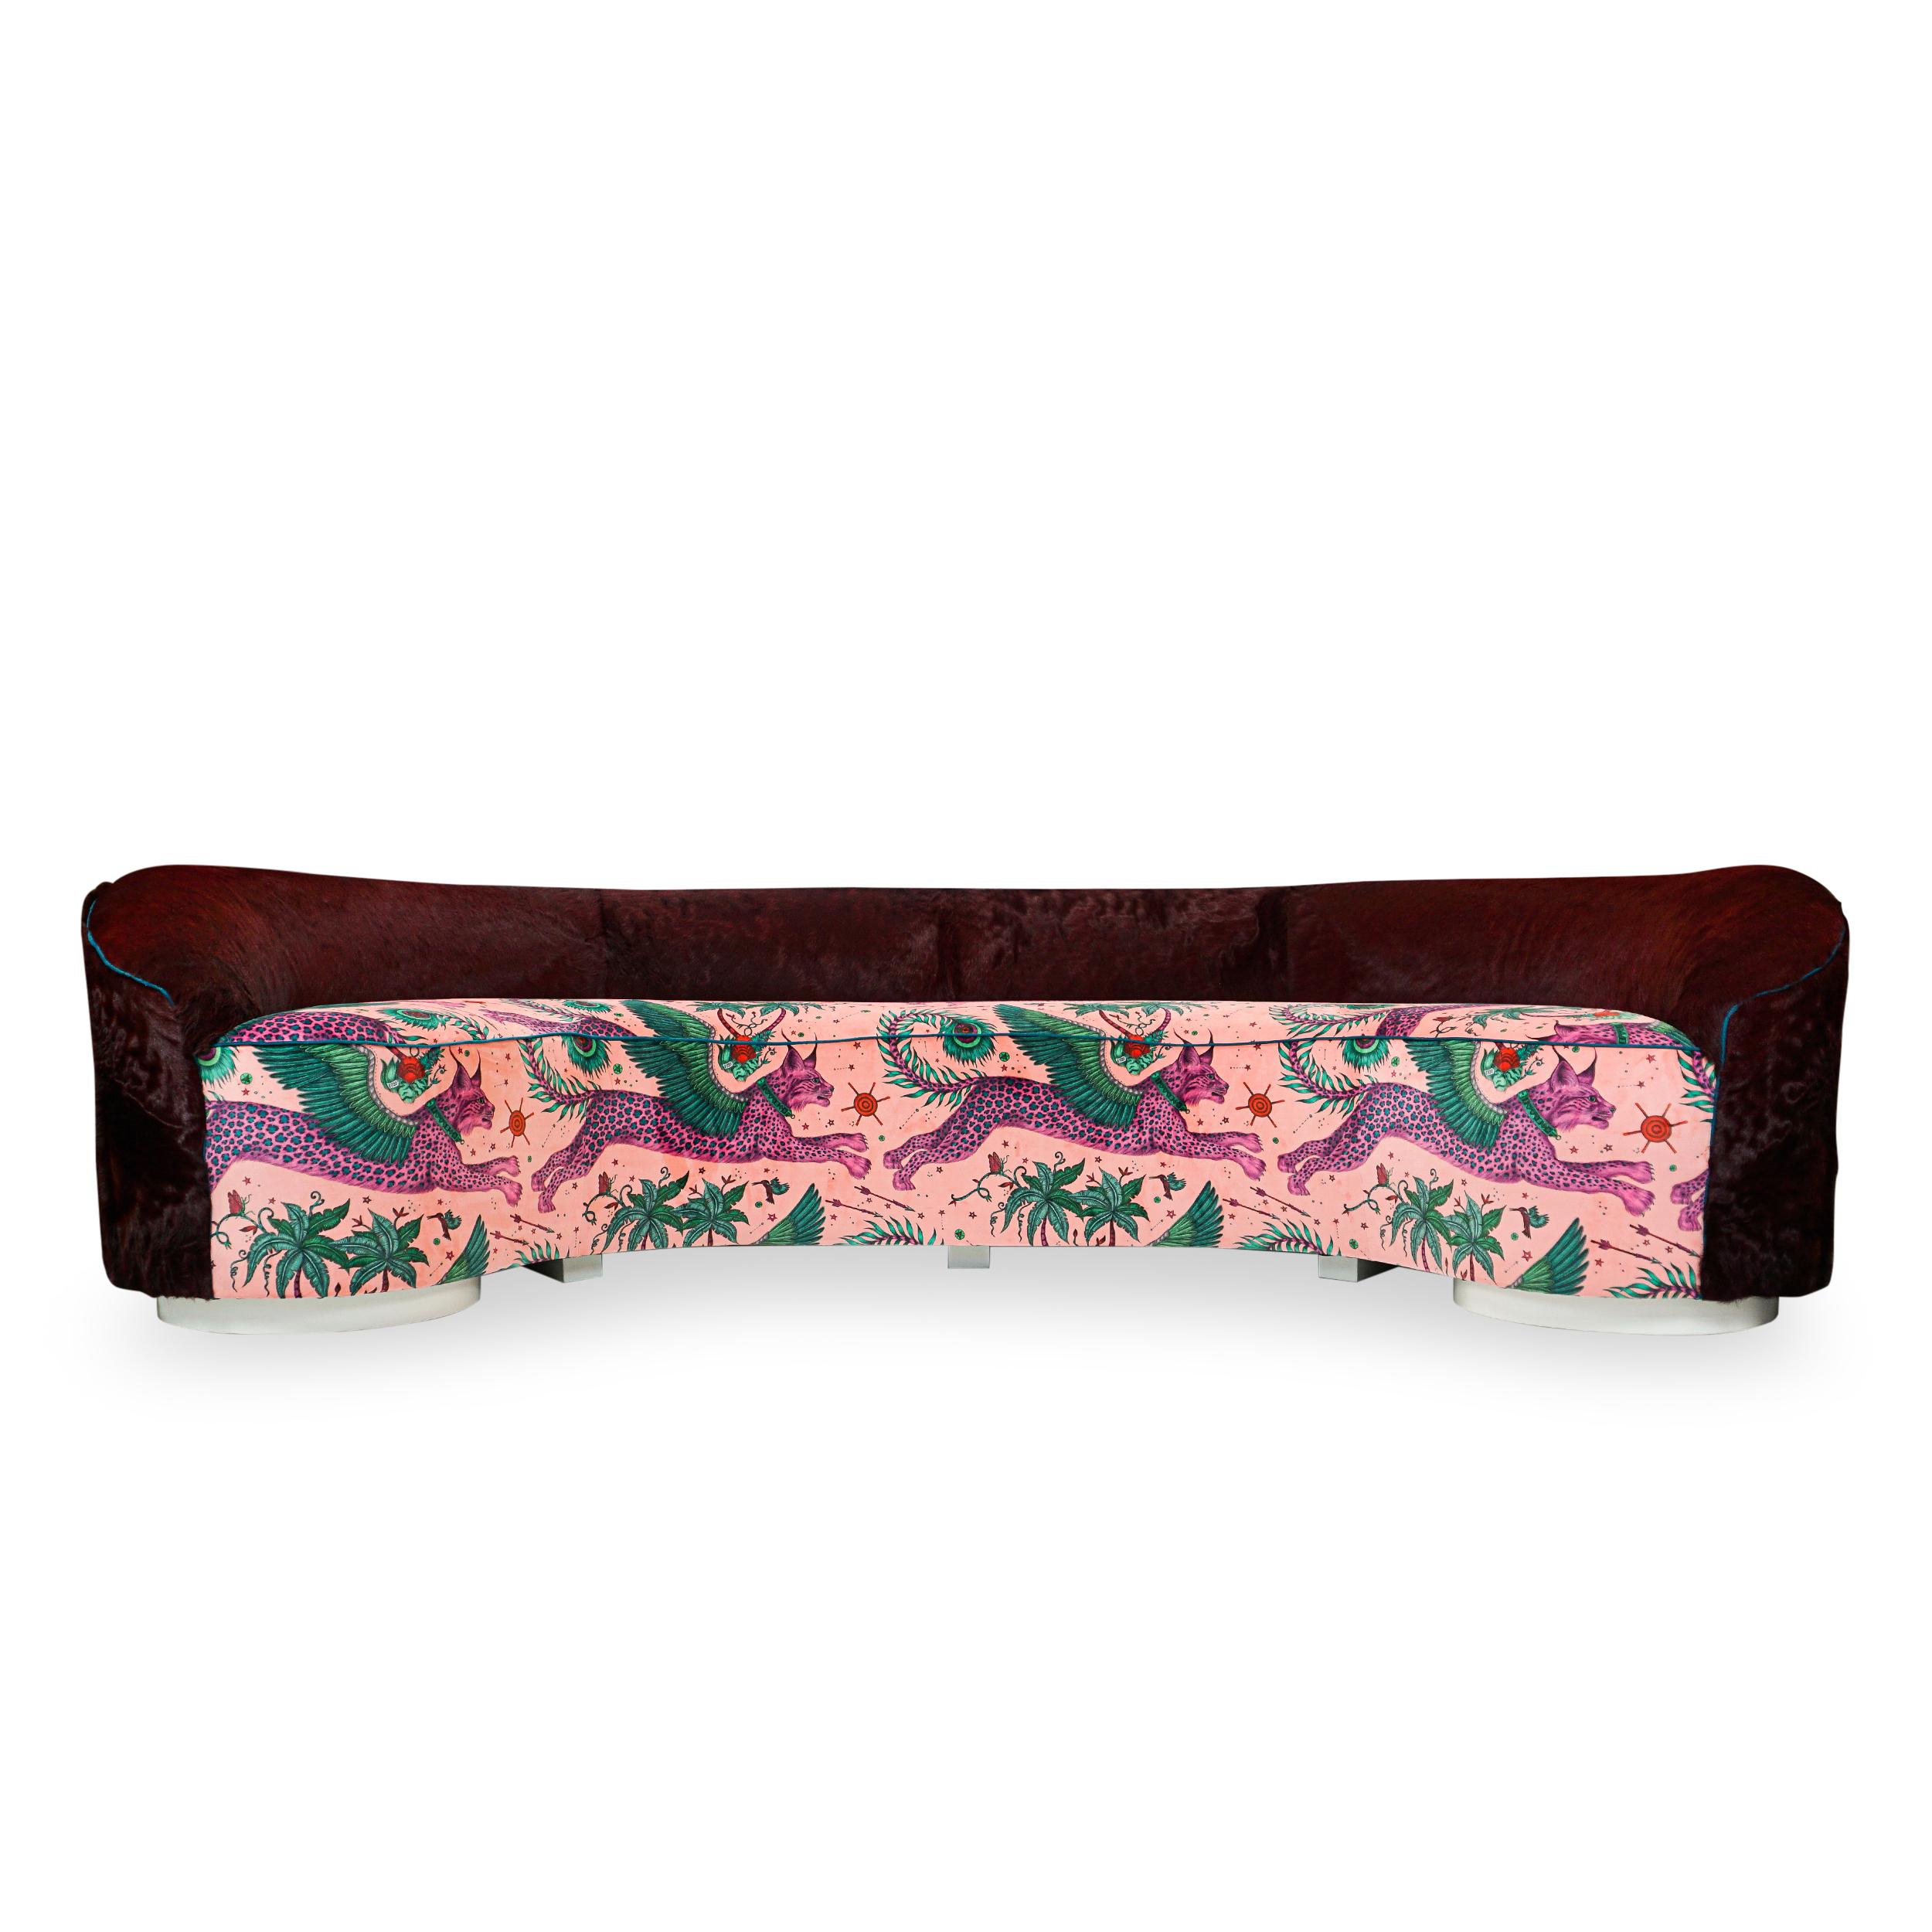 Modern Curved Sofa with Oxblood Cowhide and Fantastical Printed Velvet, Slope Arm For Sale